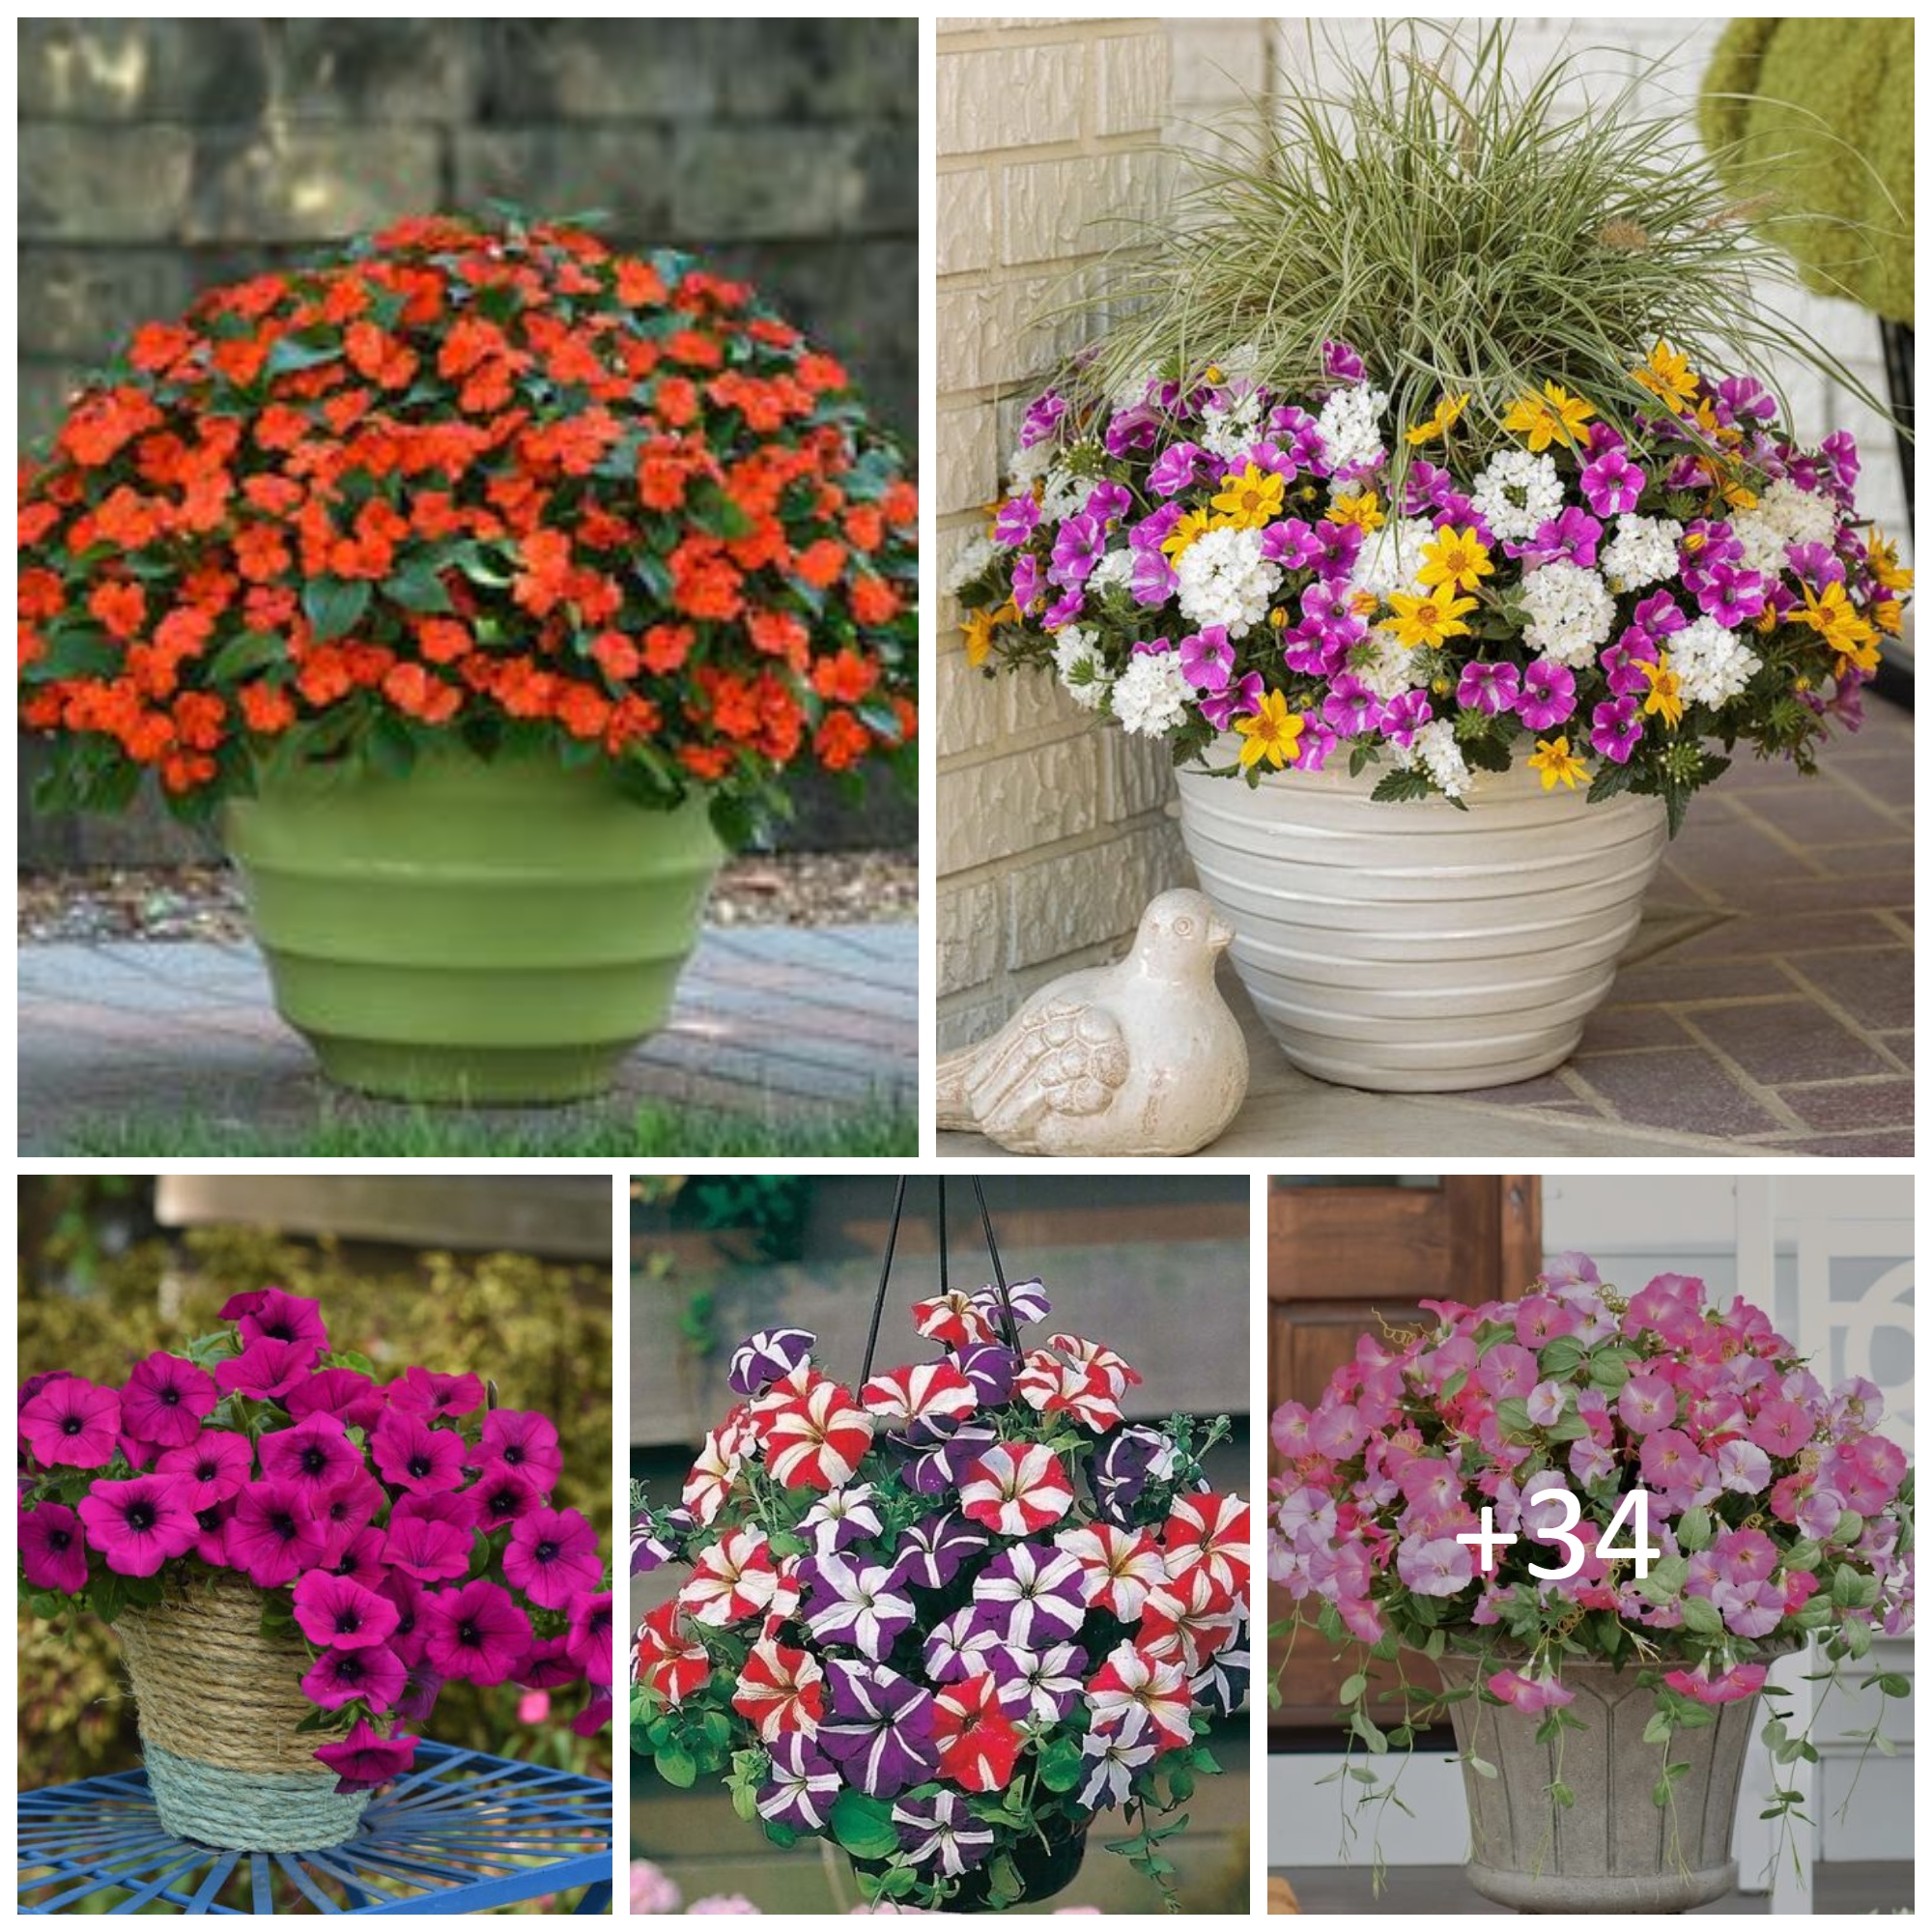 How to Plant, Grow, and Care for Petunias